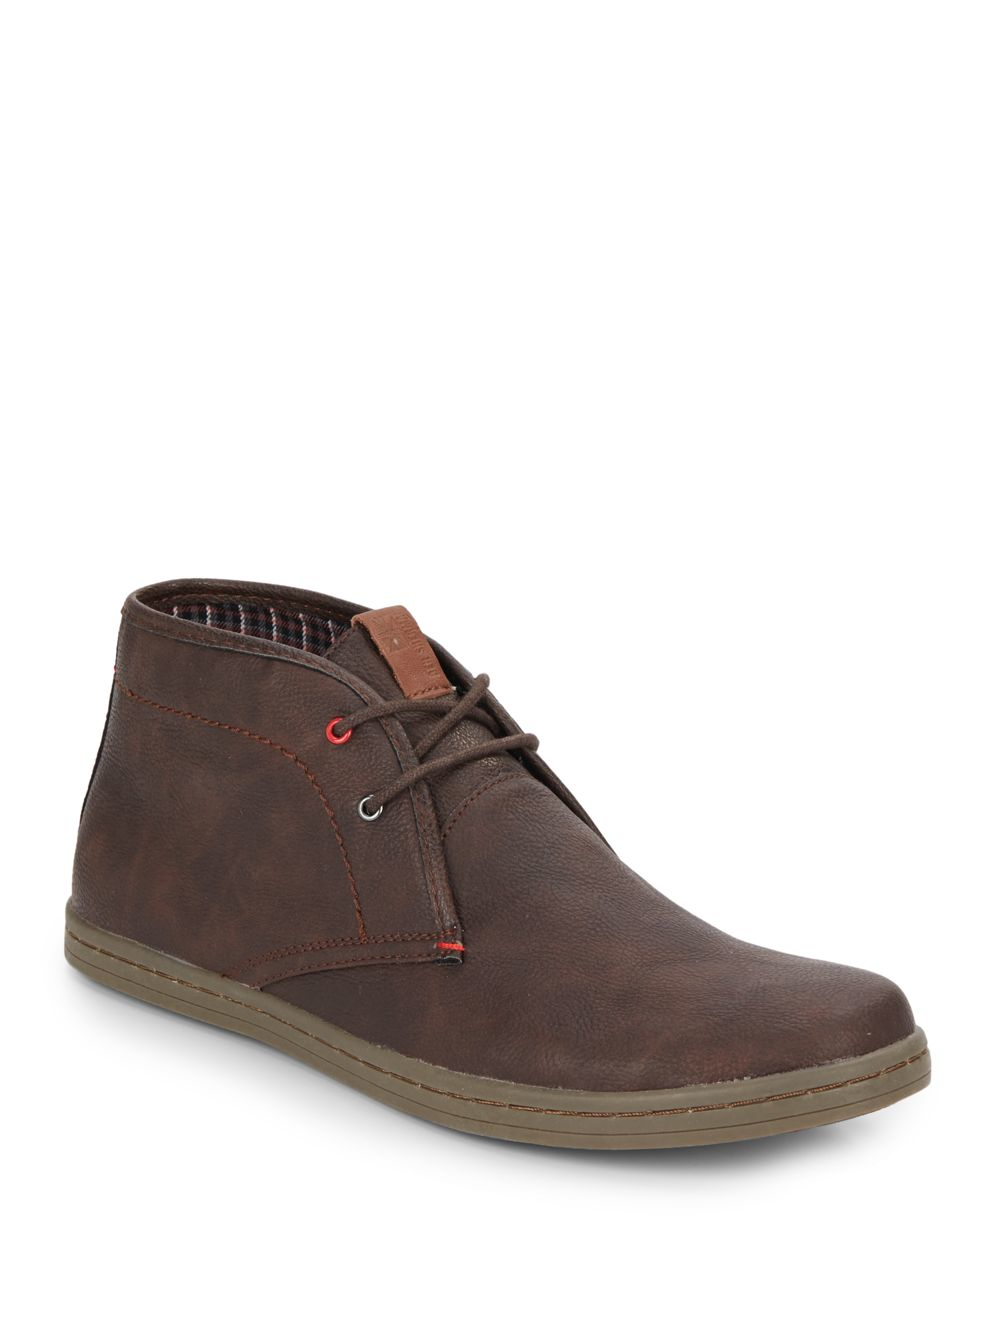 Lyst - Ben Sherman Victor Chukka Boots in Brown for Men